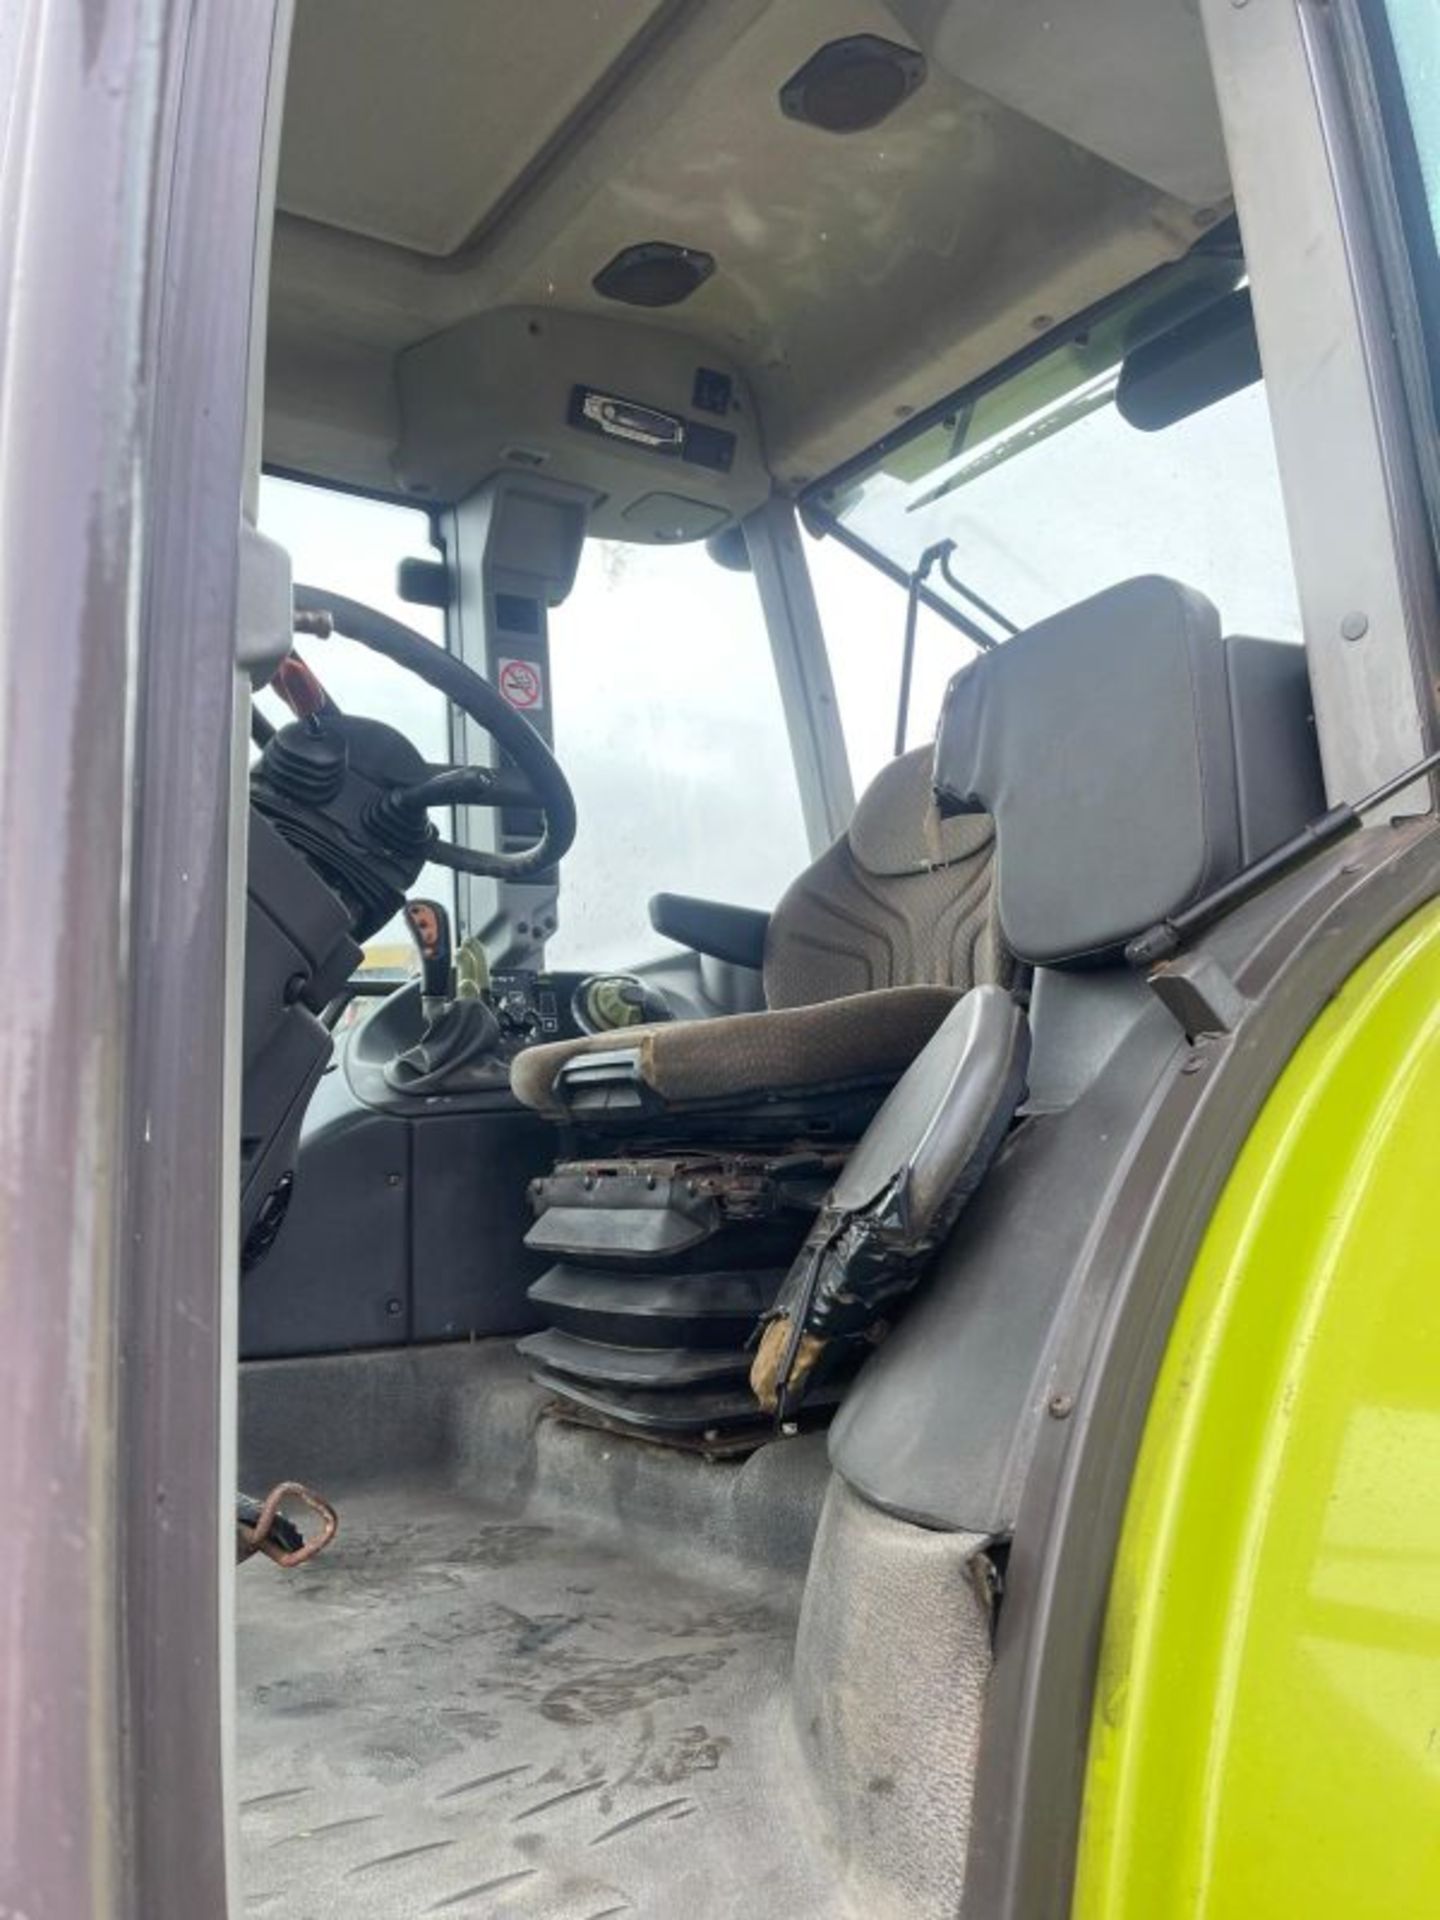 CLAAS 657 TRACTOR - Image 6 of 10